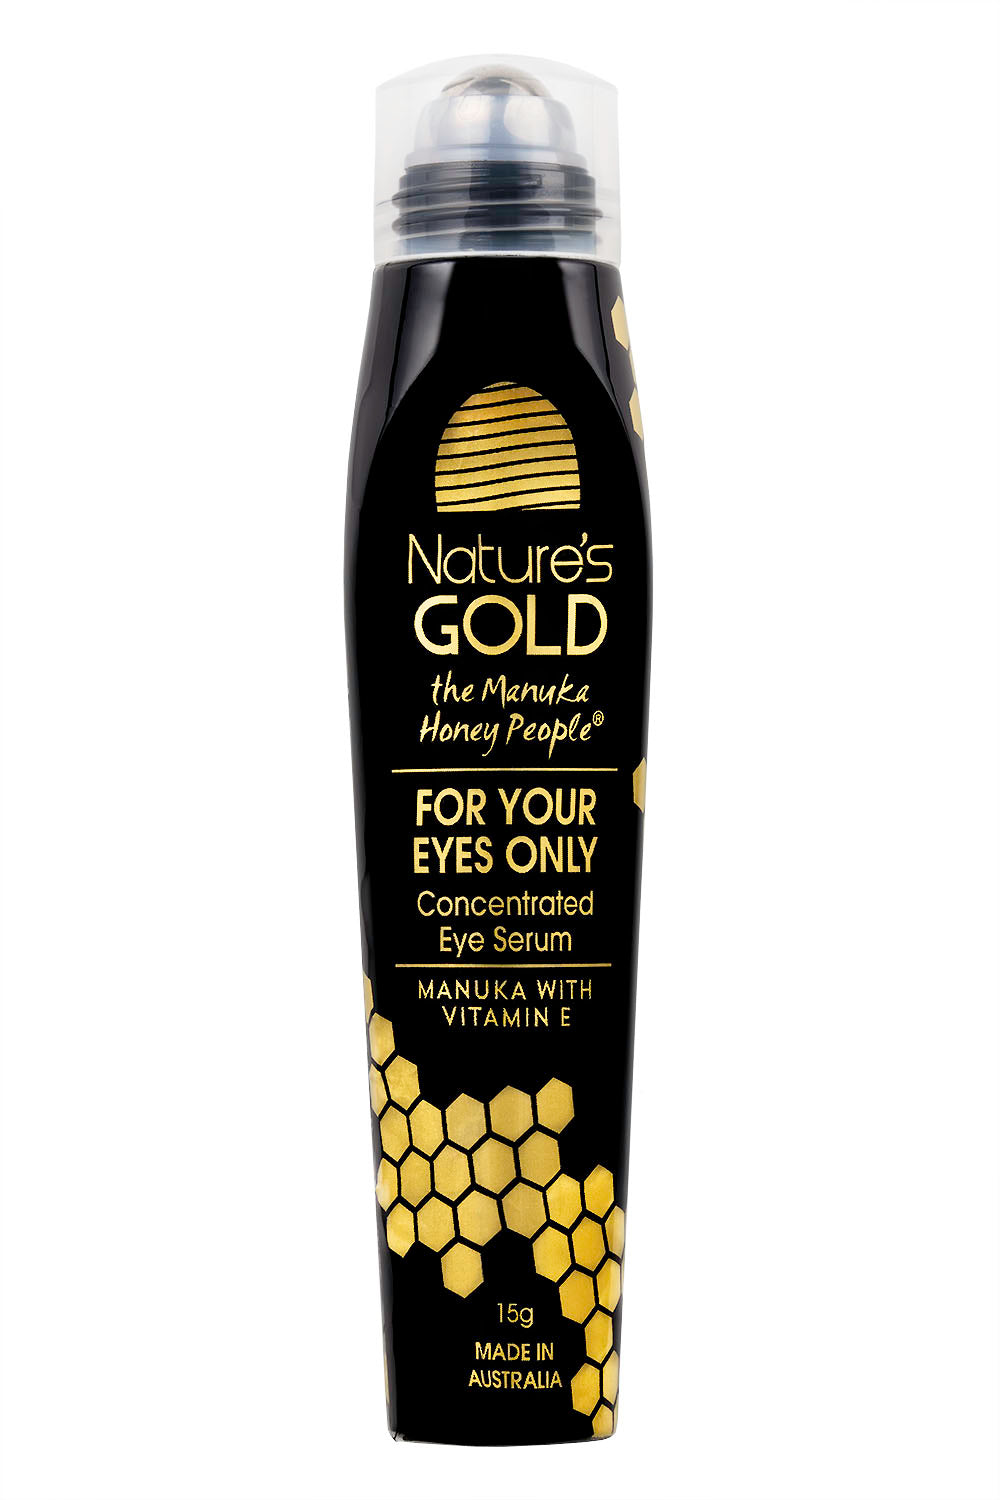 For Your Eyes Only Serum - Limited time Buy one get 1 free!